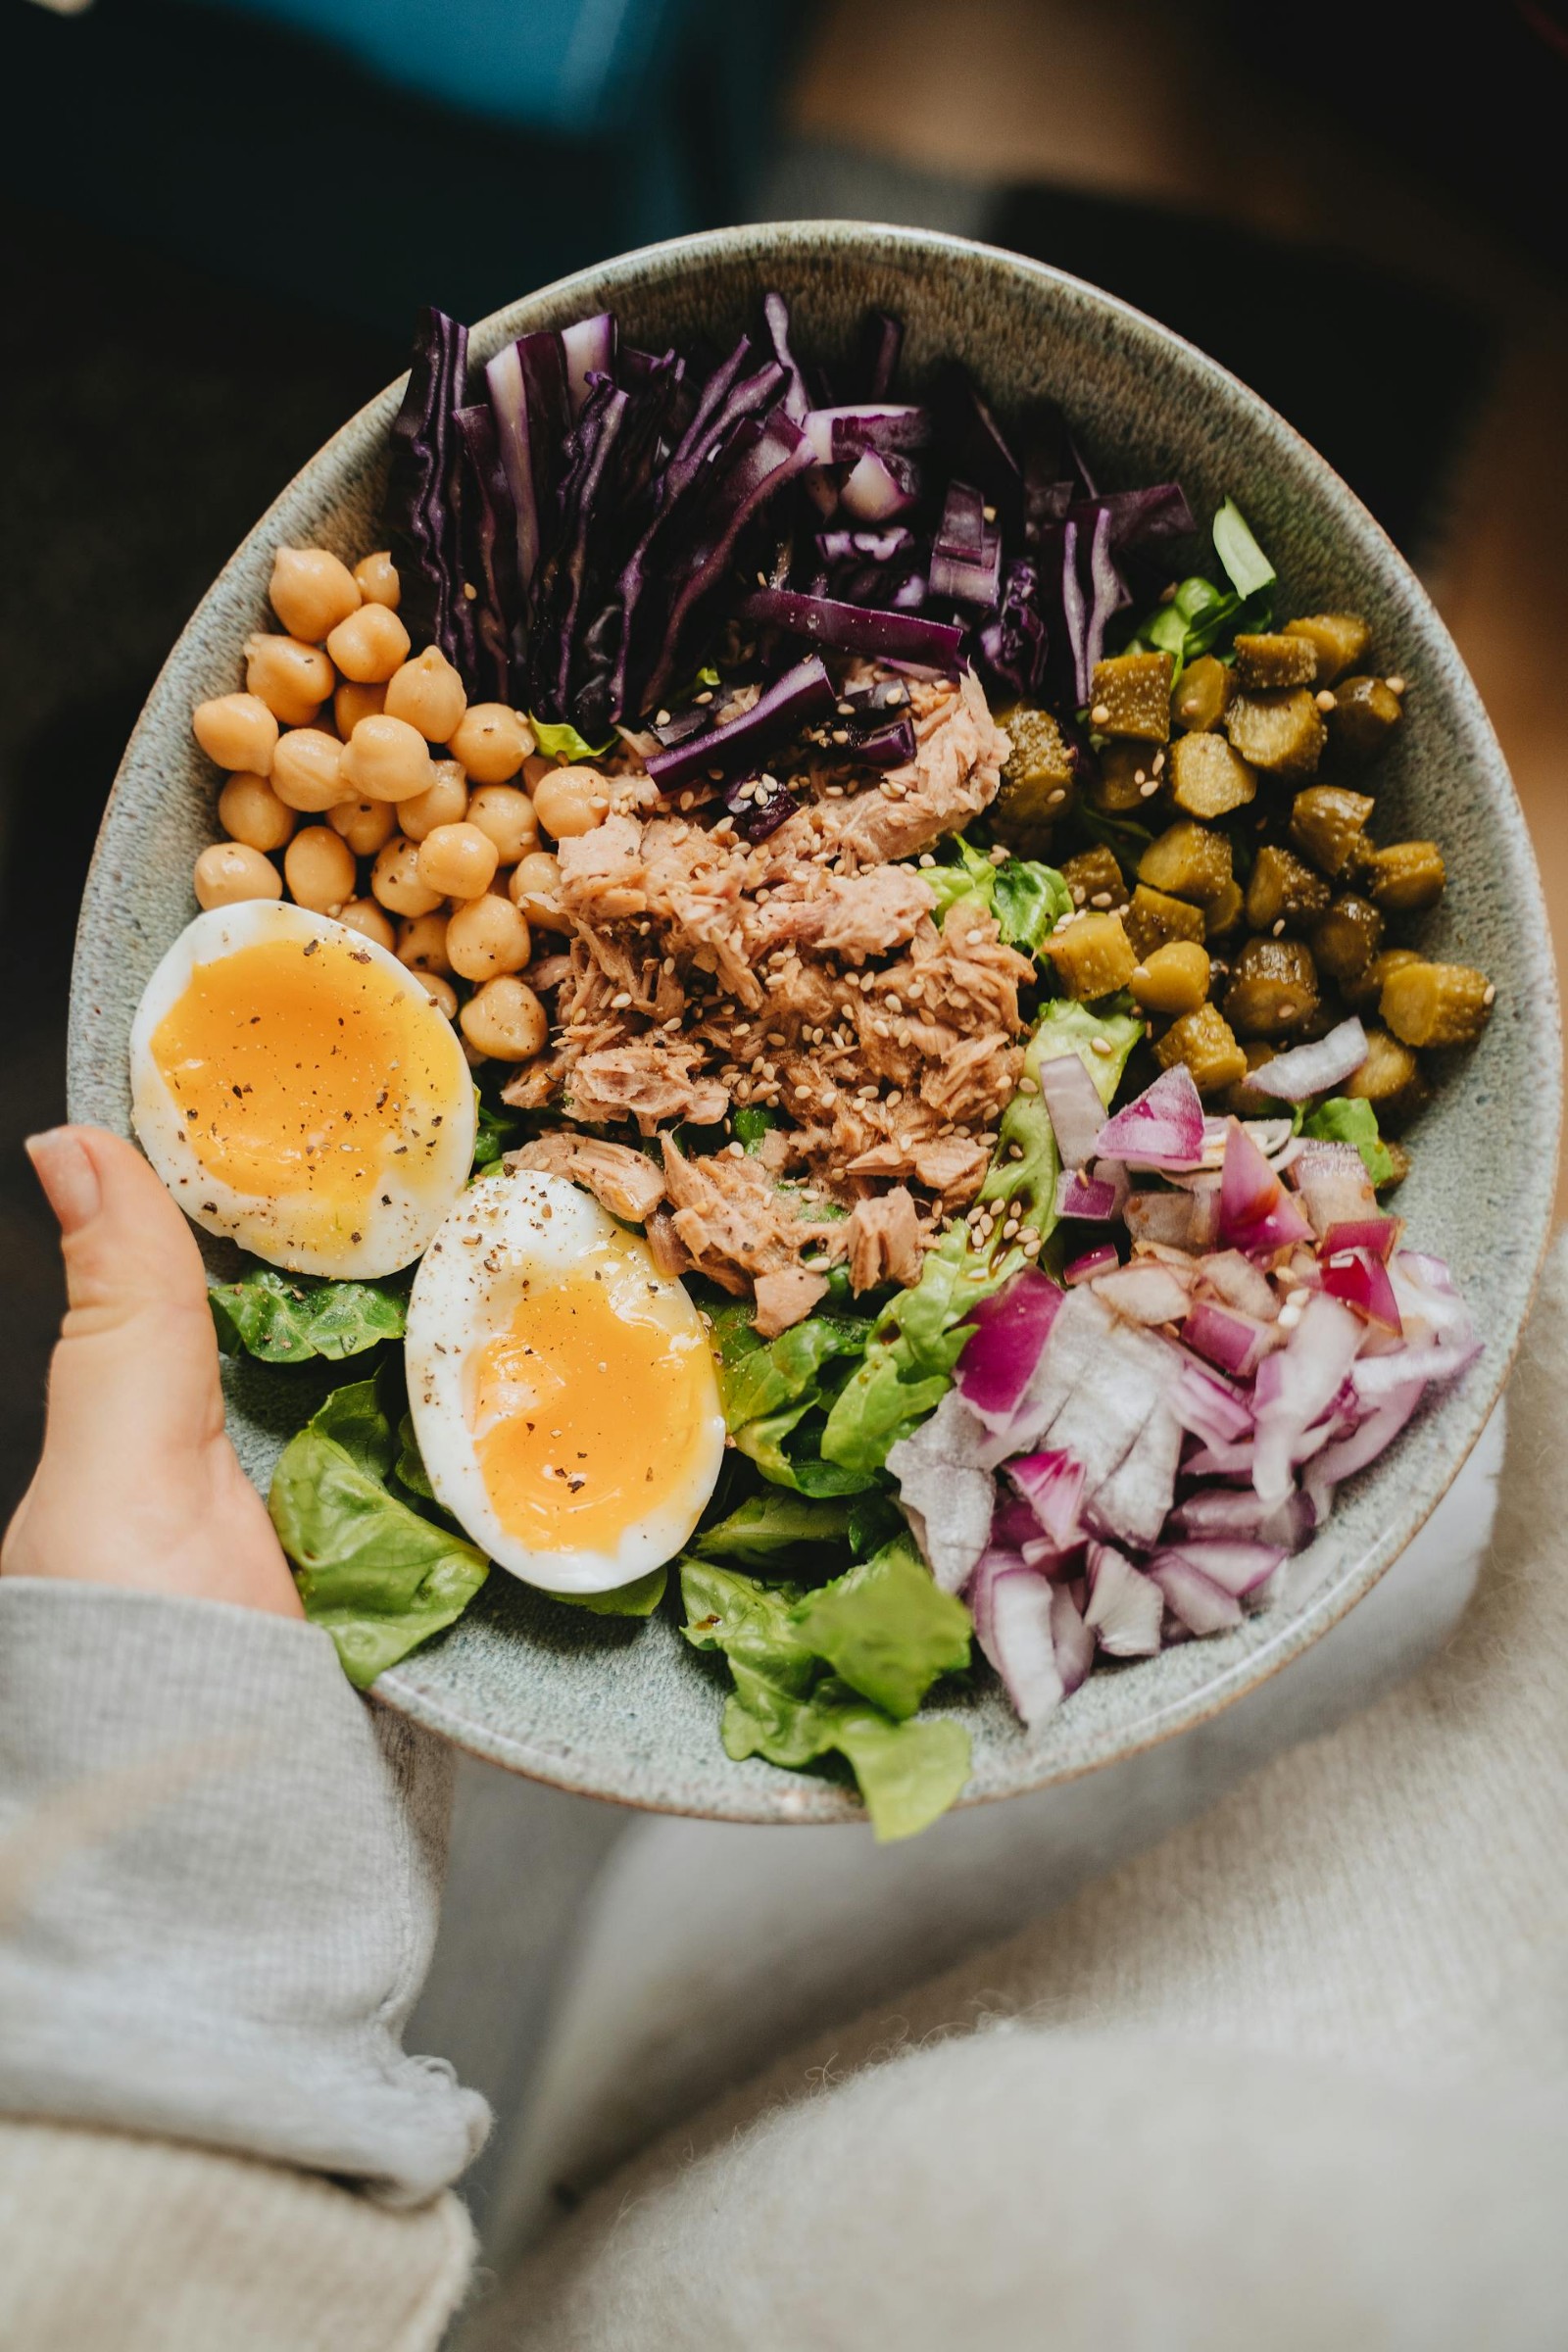 A bowl of salad with a boiled egg sliced in half, lettuce, chickpeas, onions, and tuna.